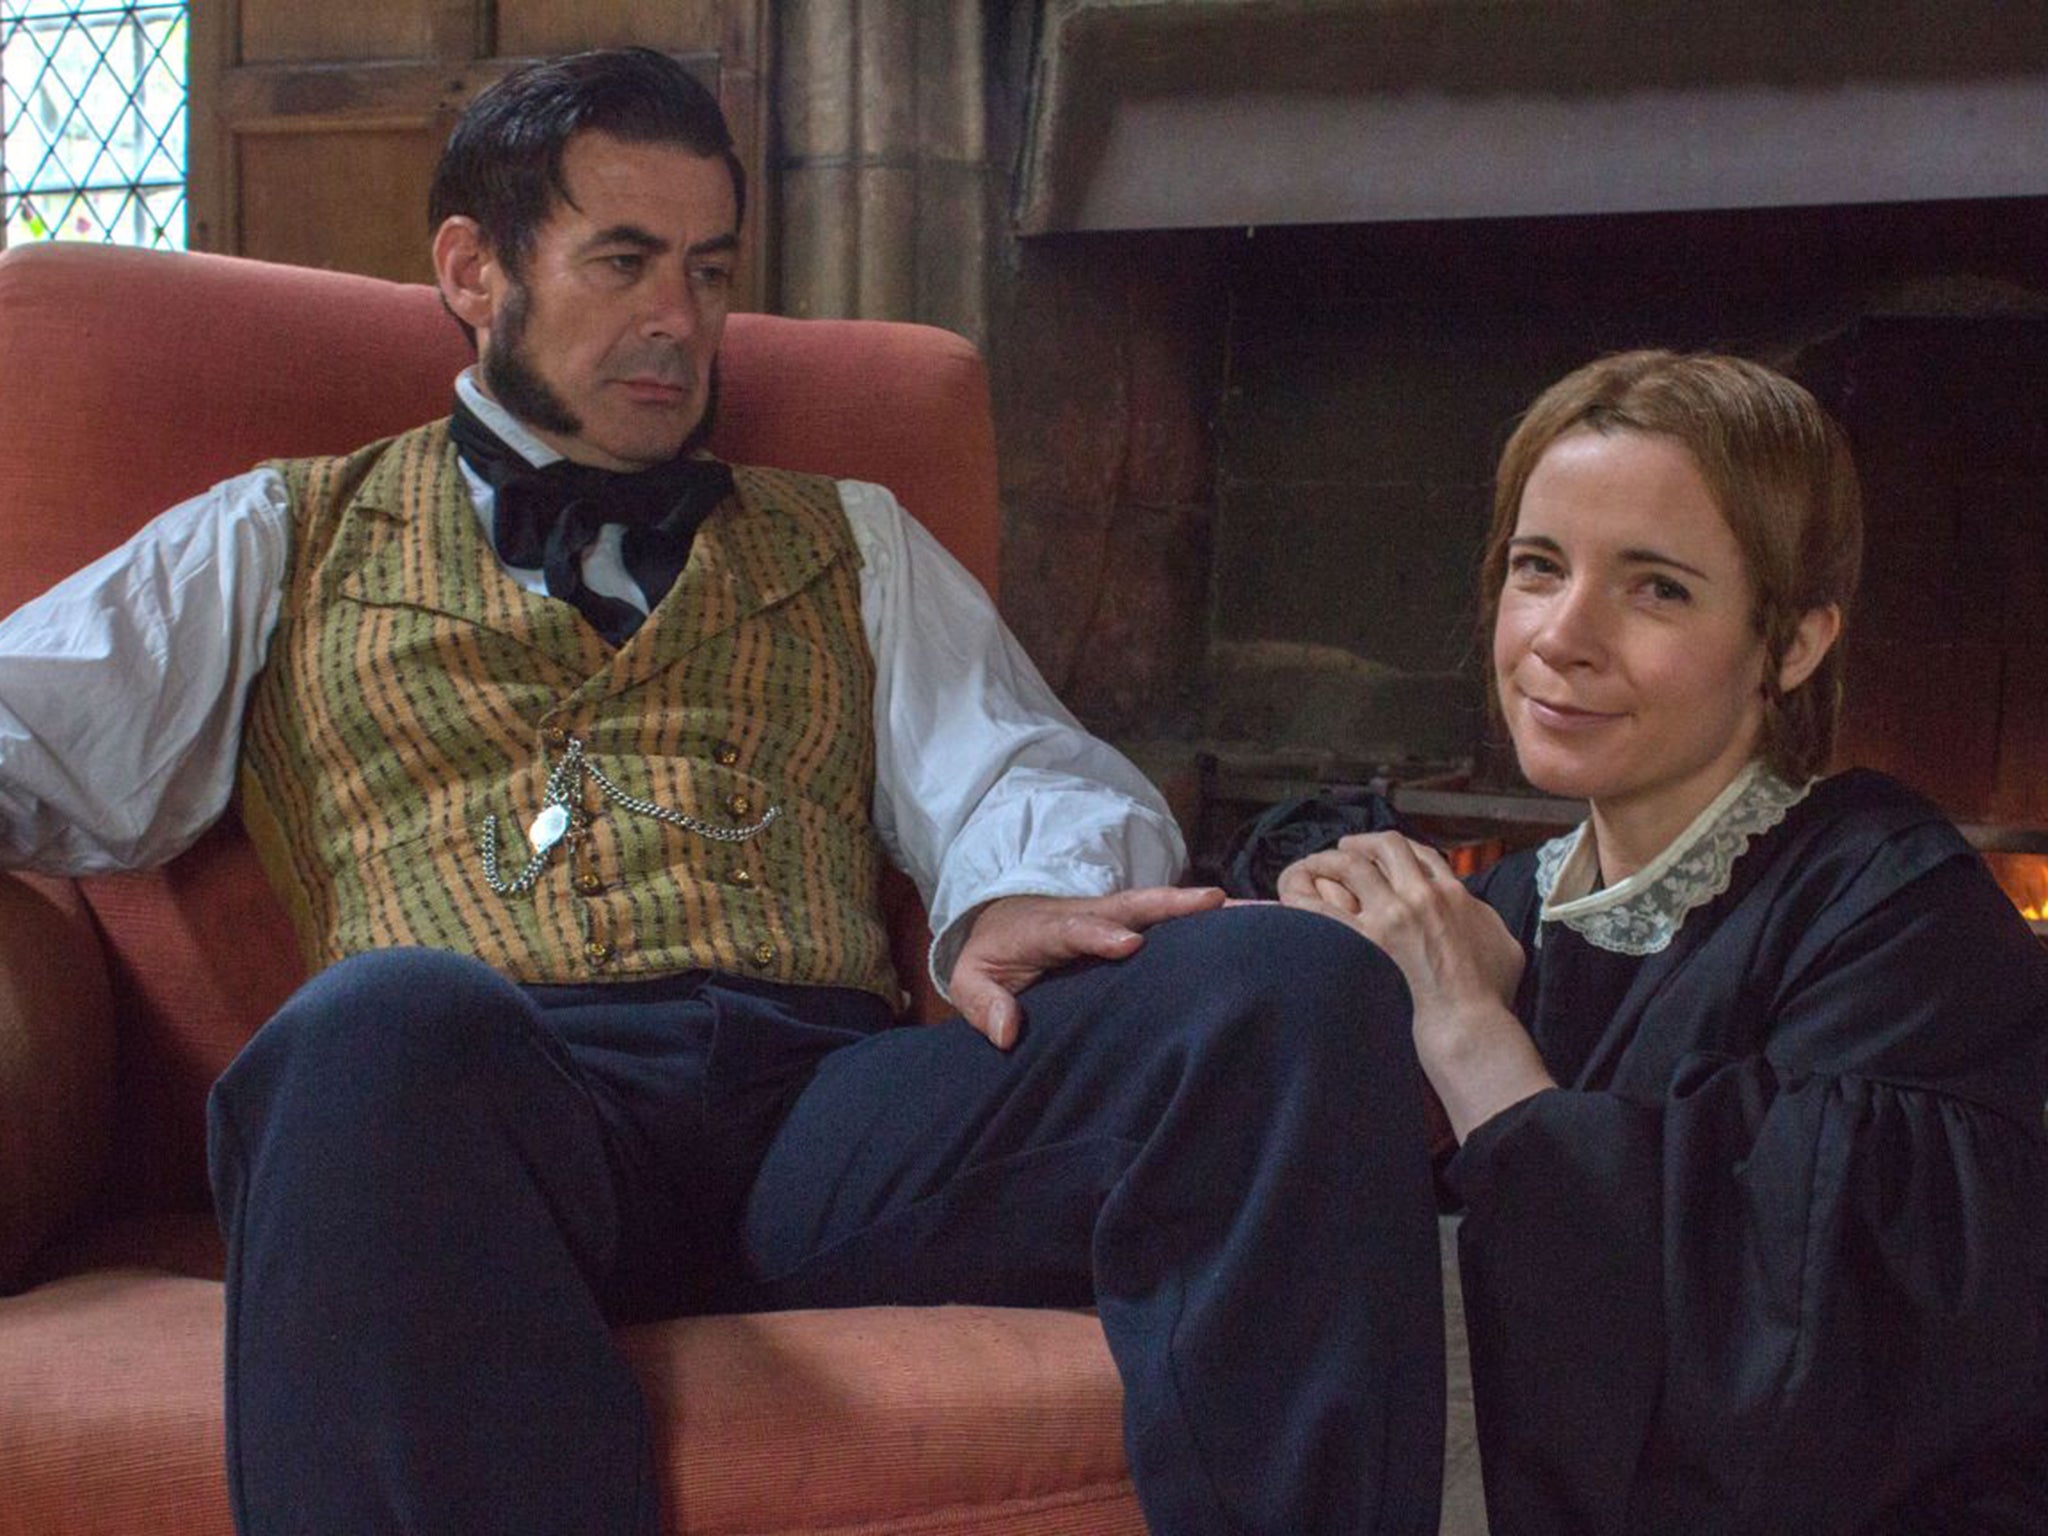 Plain Jane: Lucy Worsley dressed as Jane Eyre with Rochester in ‘A Very British Romance’